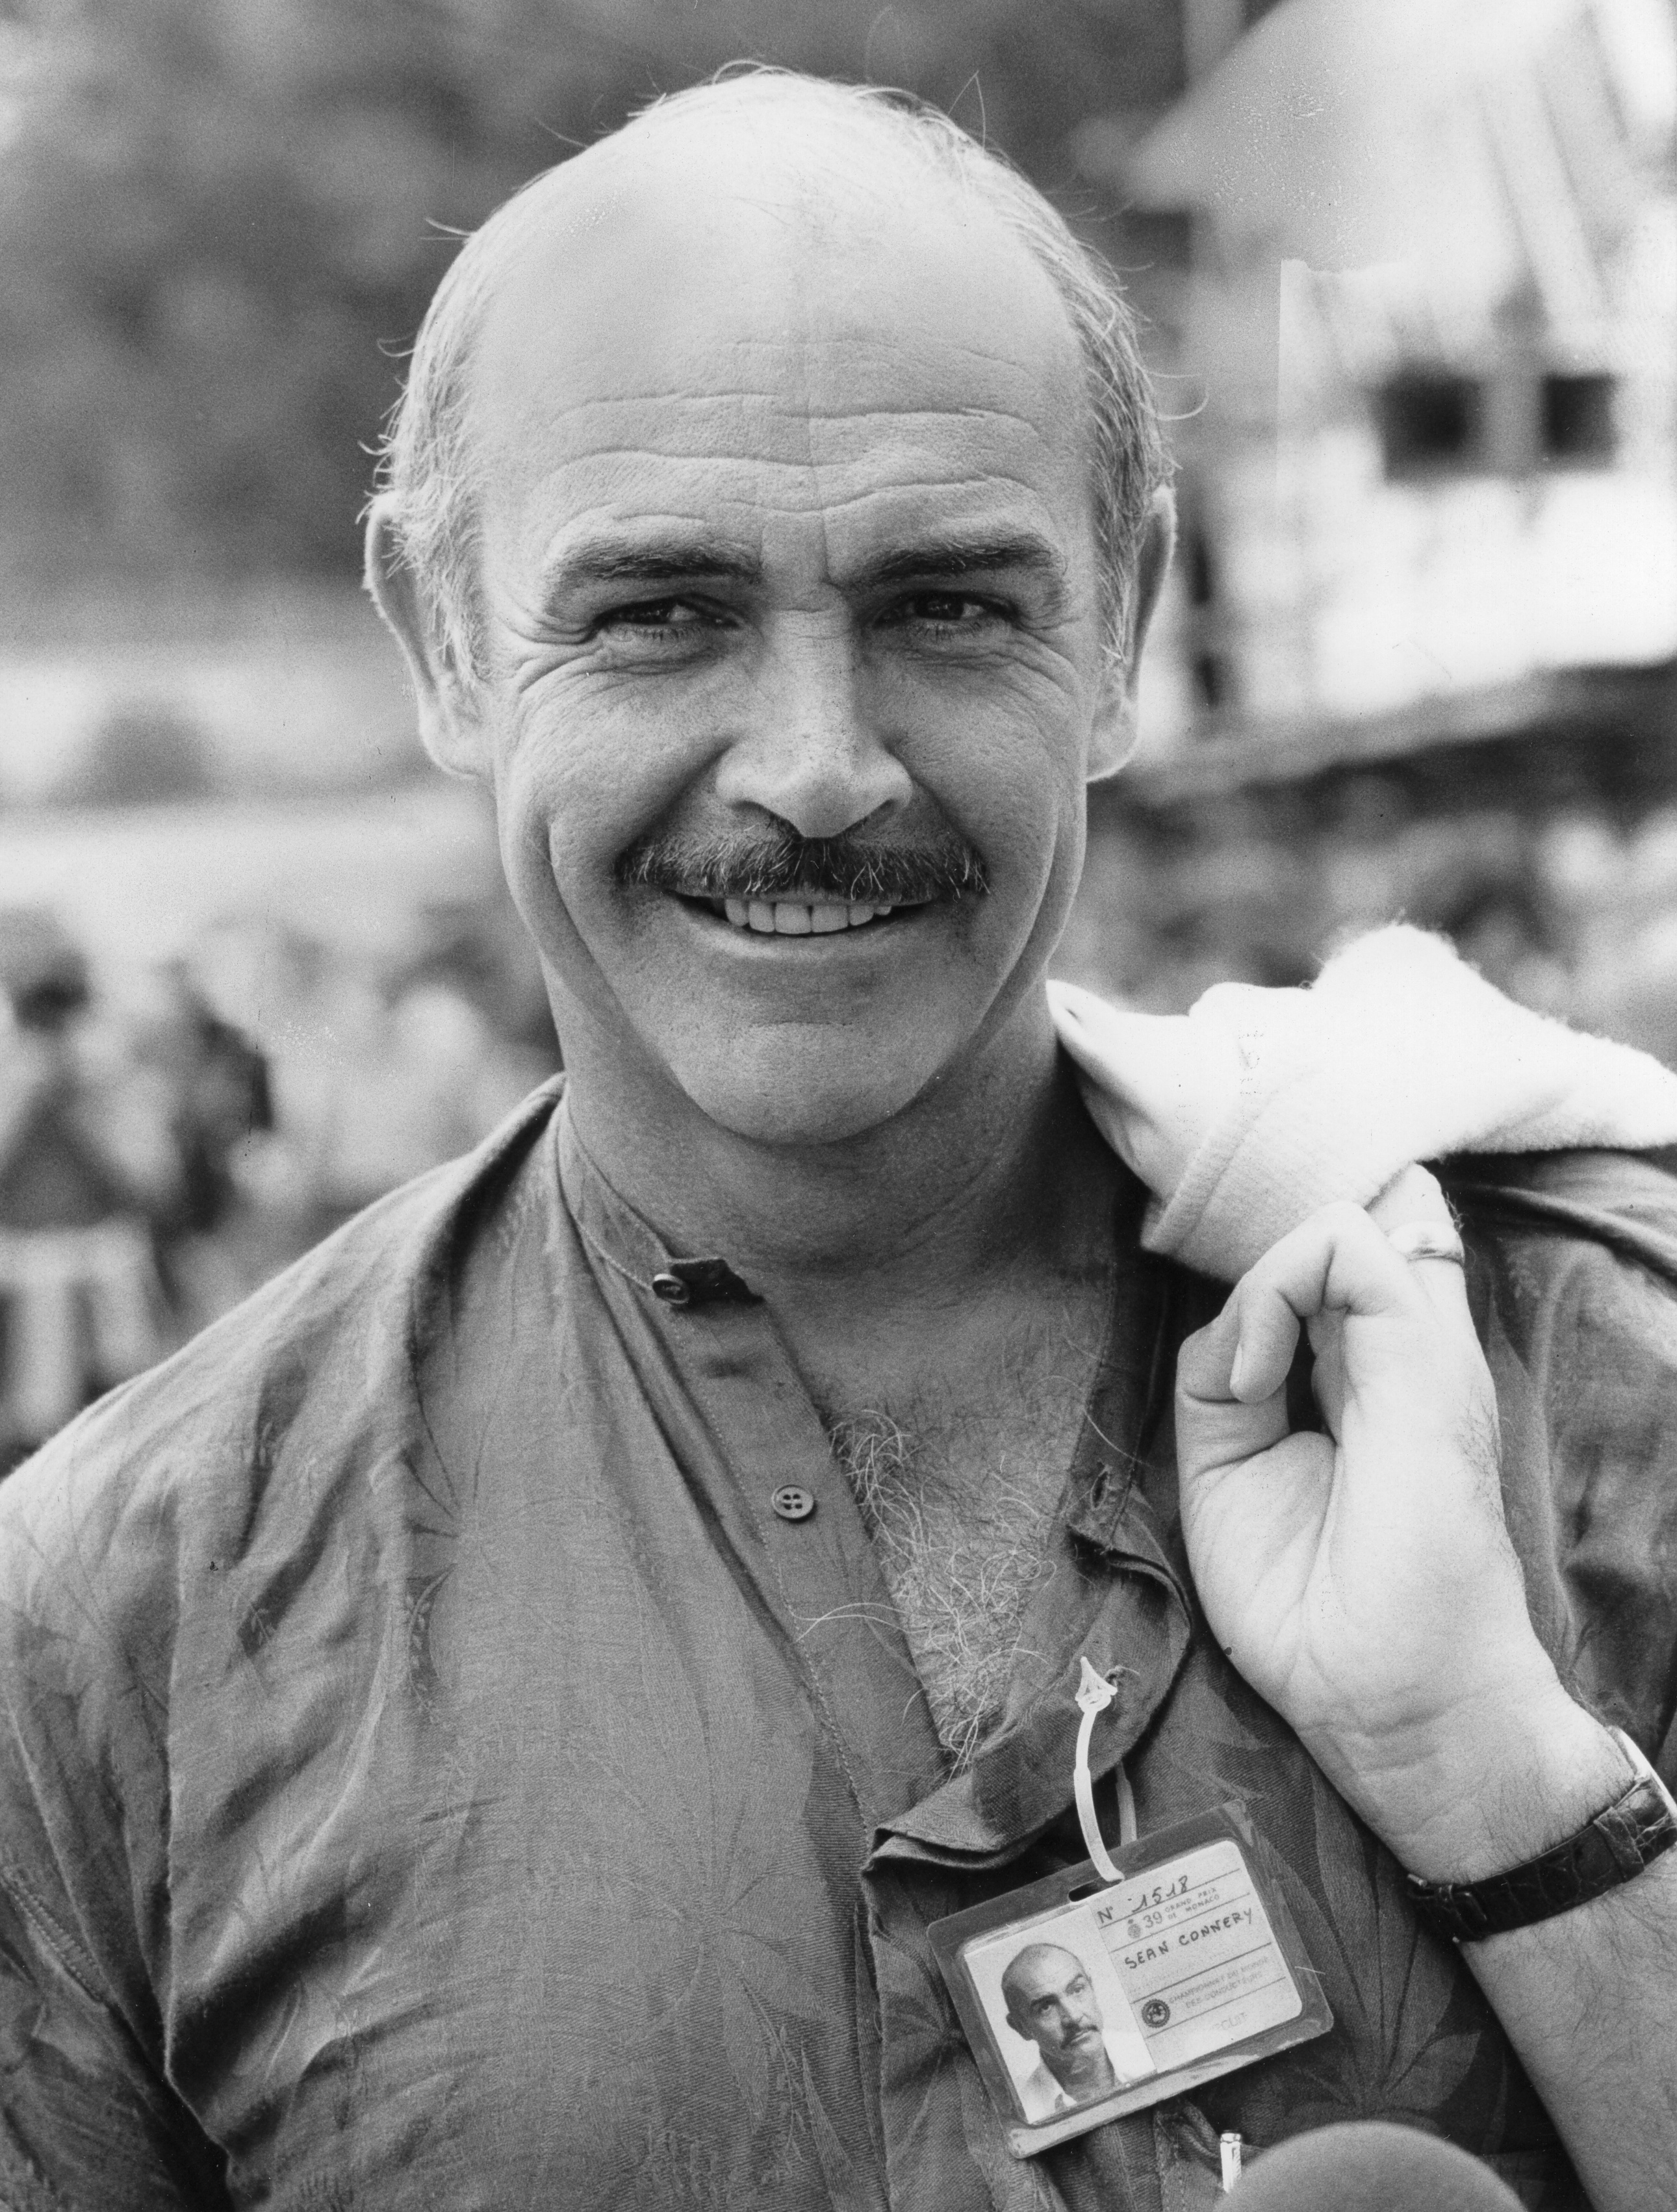 Sean Connery in a casual shirt with ID badge, smiling with a small towel over his shoulder